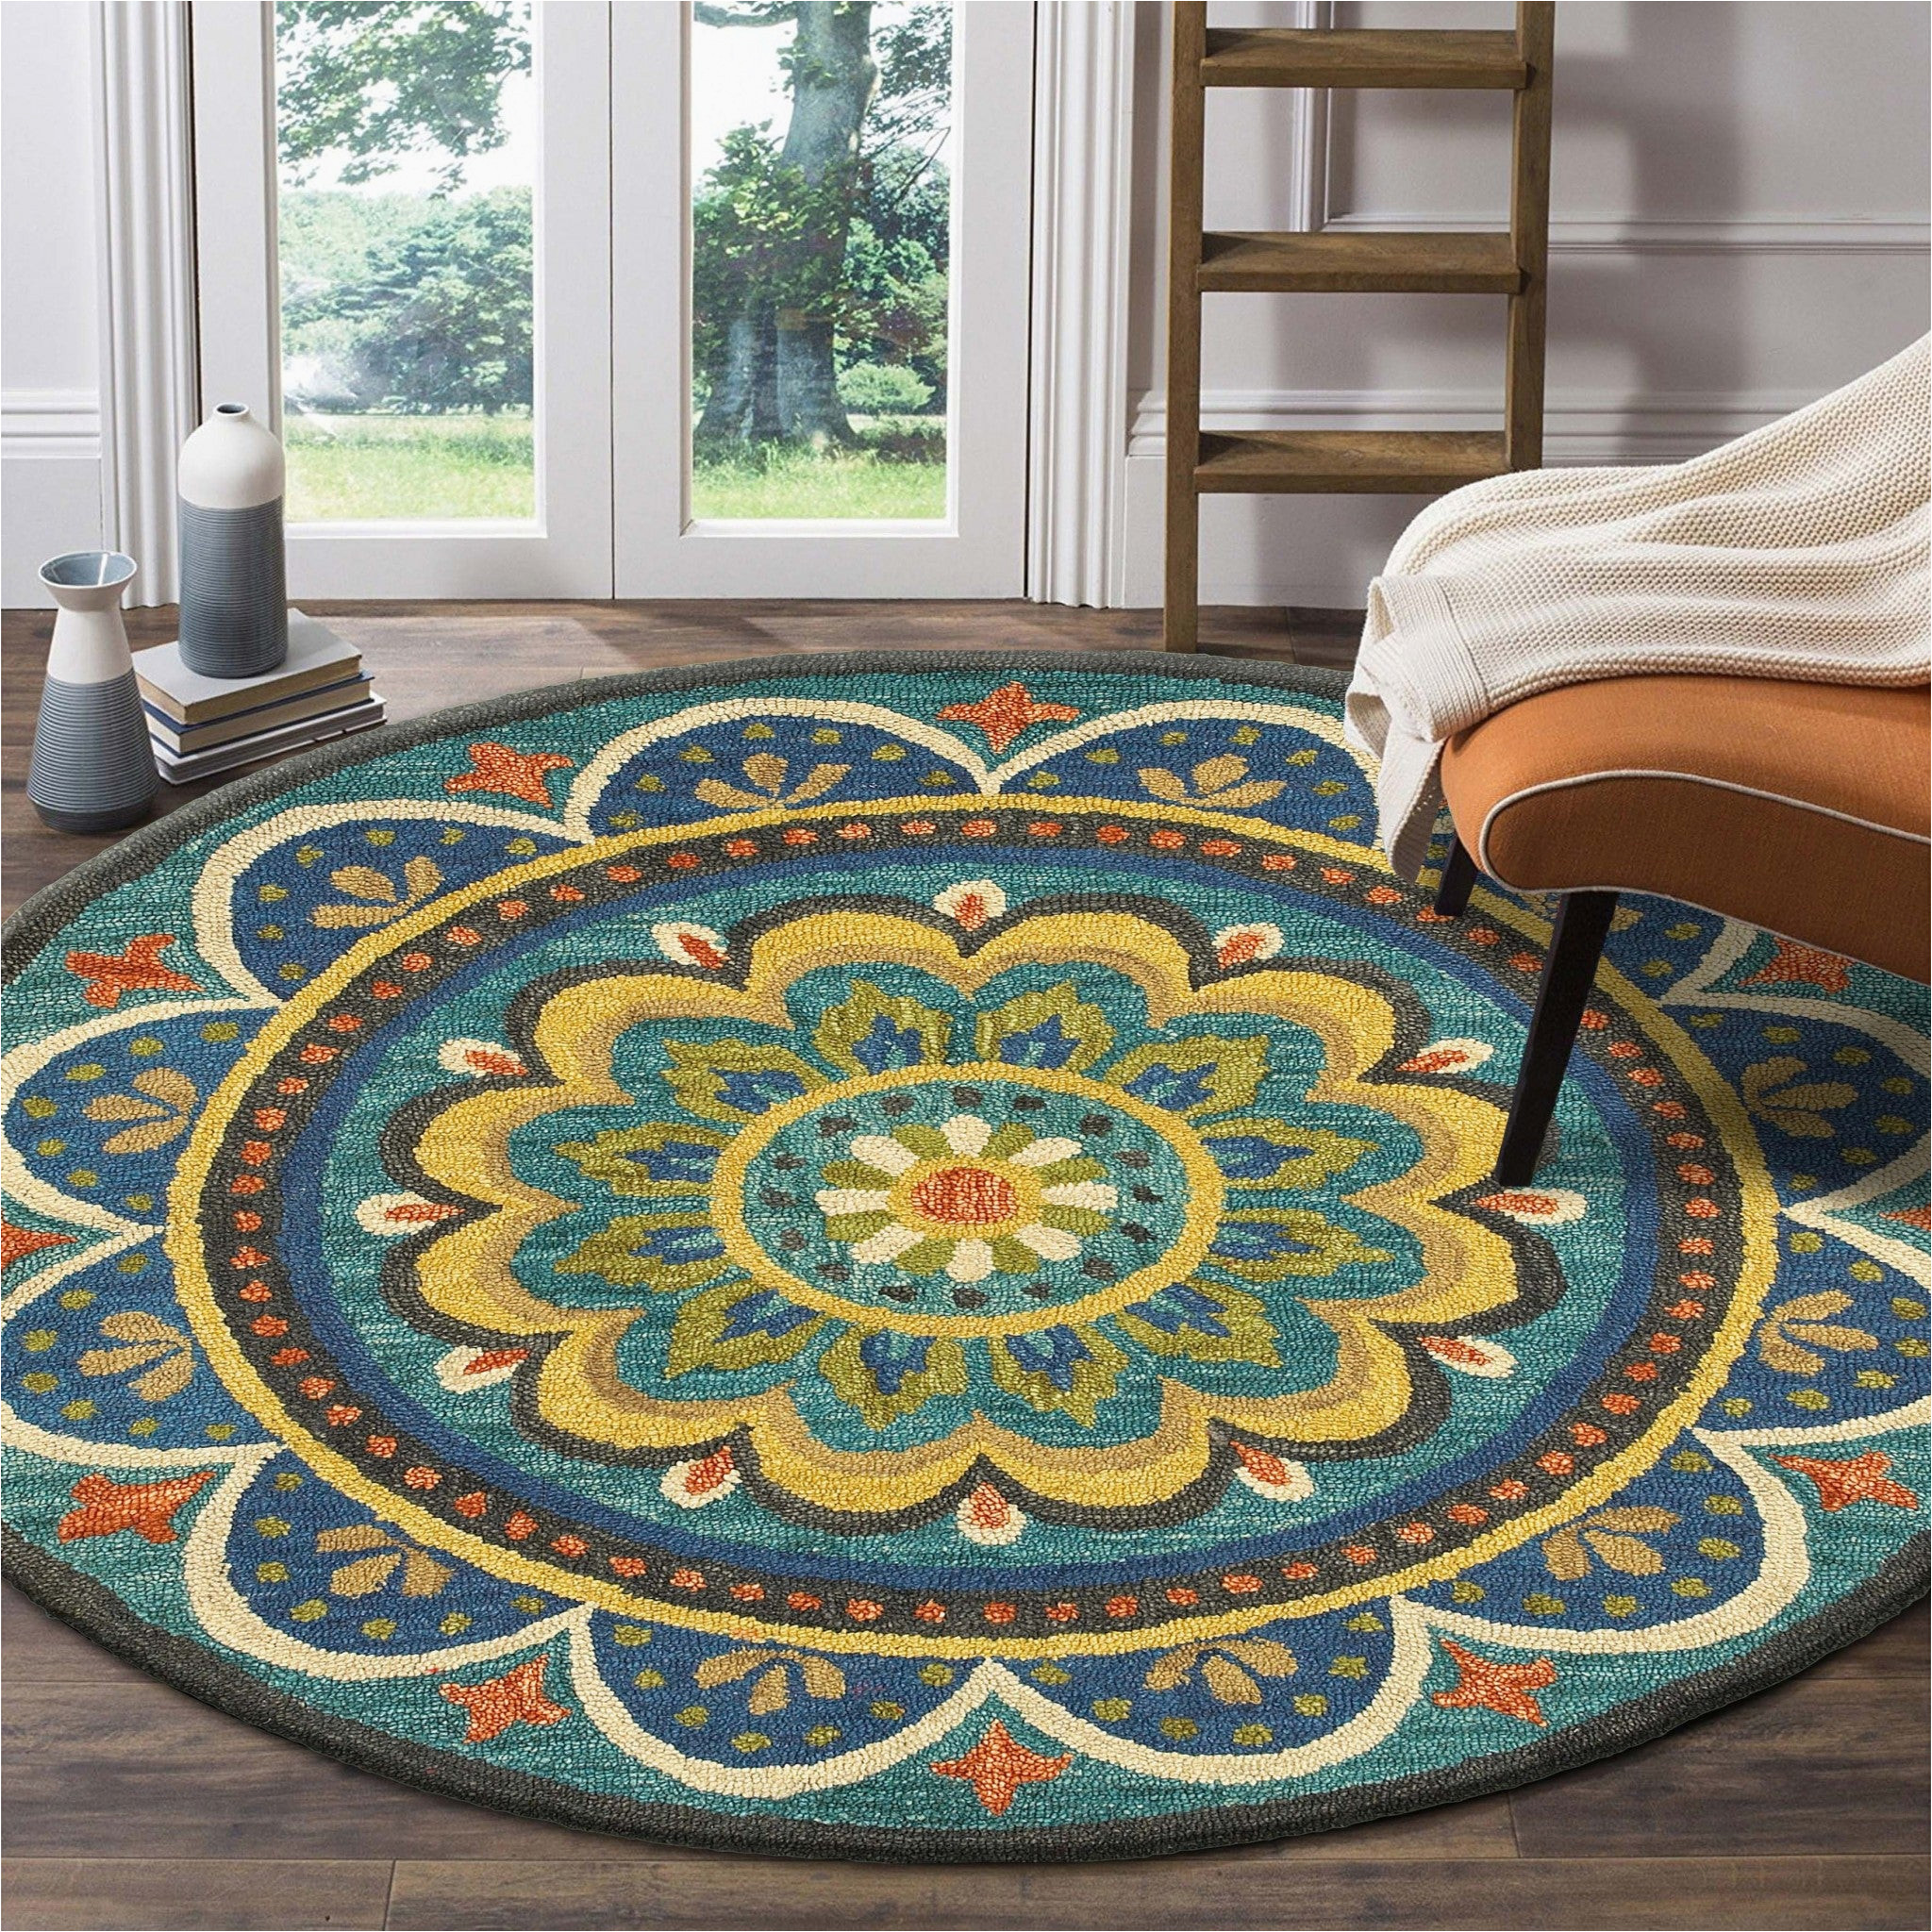 Pier One Round area Rugs Round Blue Floral Mandala area Rug